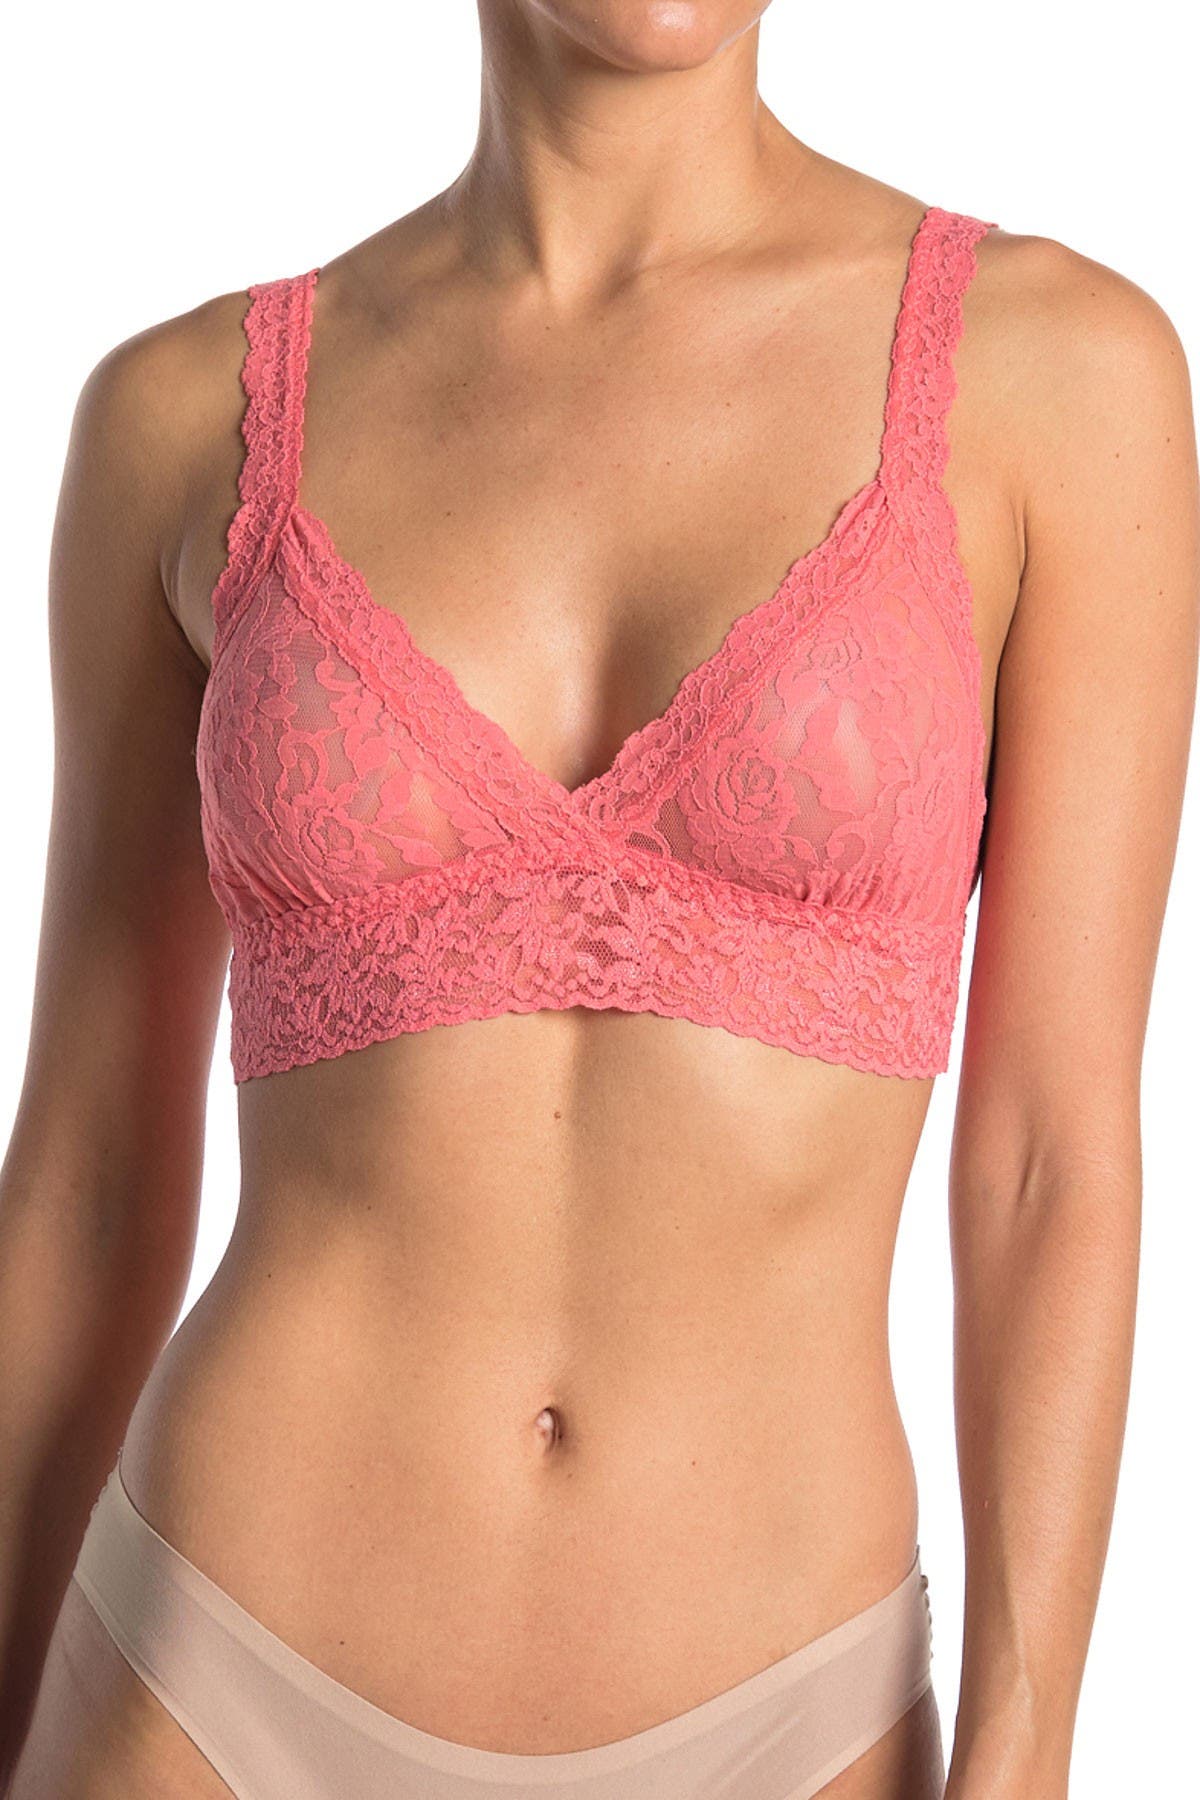 Hanky Panky Signature Lace Padded Bralette In Red